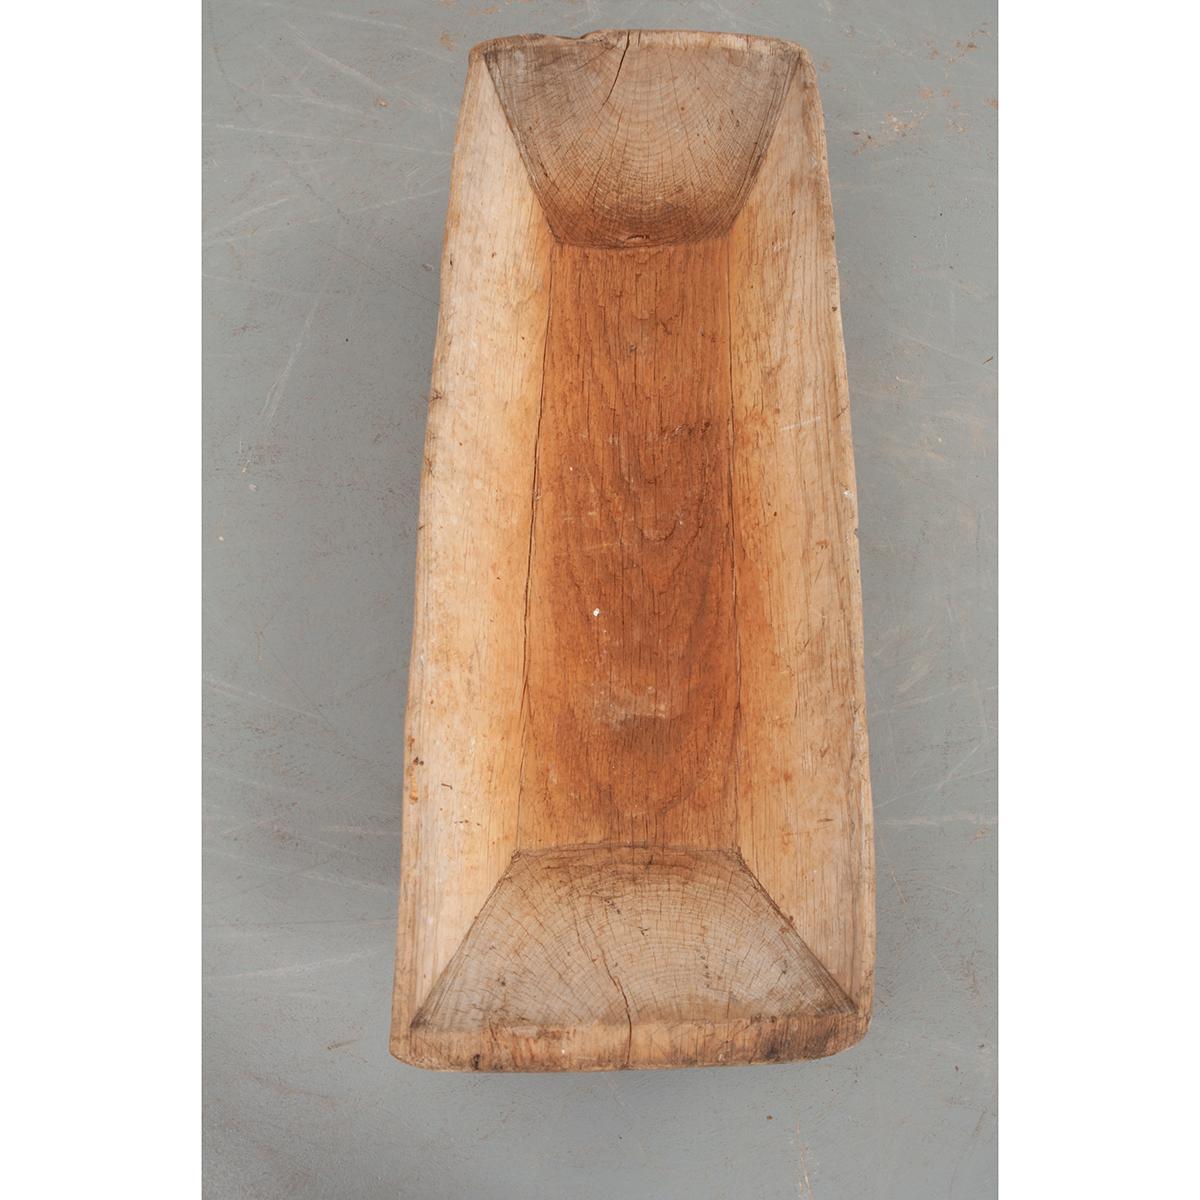 This is a French dough bowl, a wooden vessel used to mix bread dough. These bowls were found in every home and were typically carved from a large piece of wood. Now, it would make a nice conversation piece or decorate a dining room table. Circa